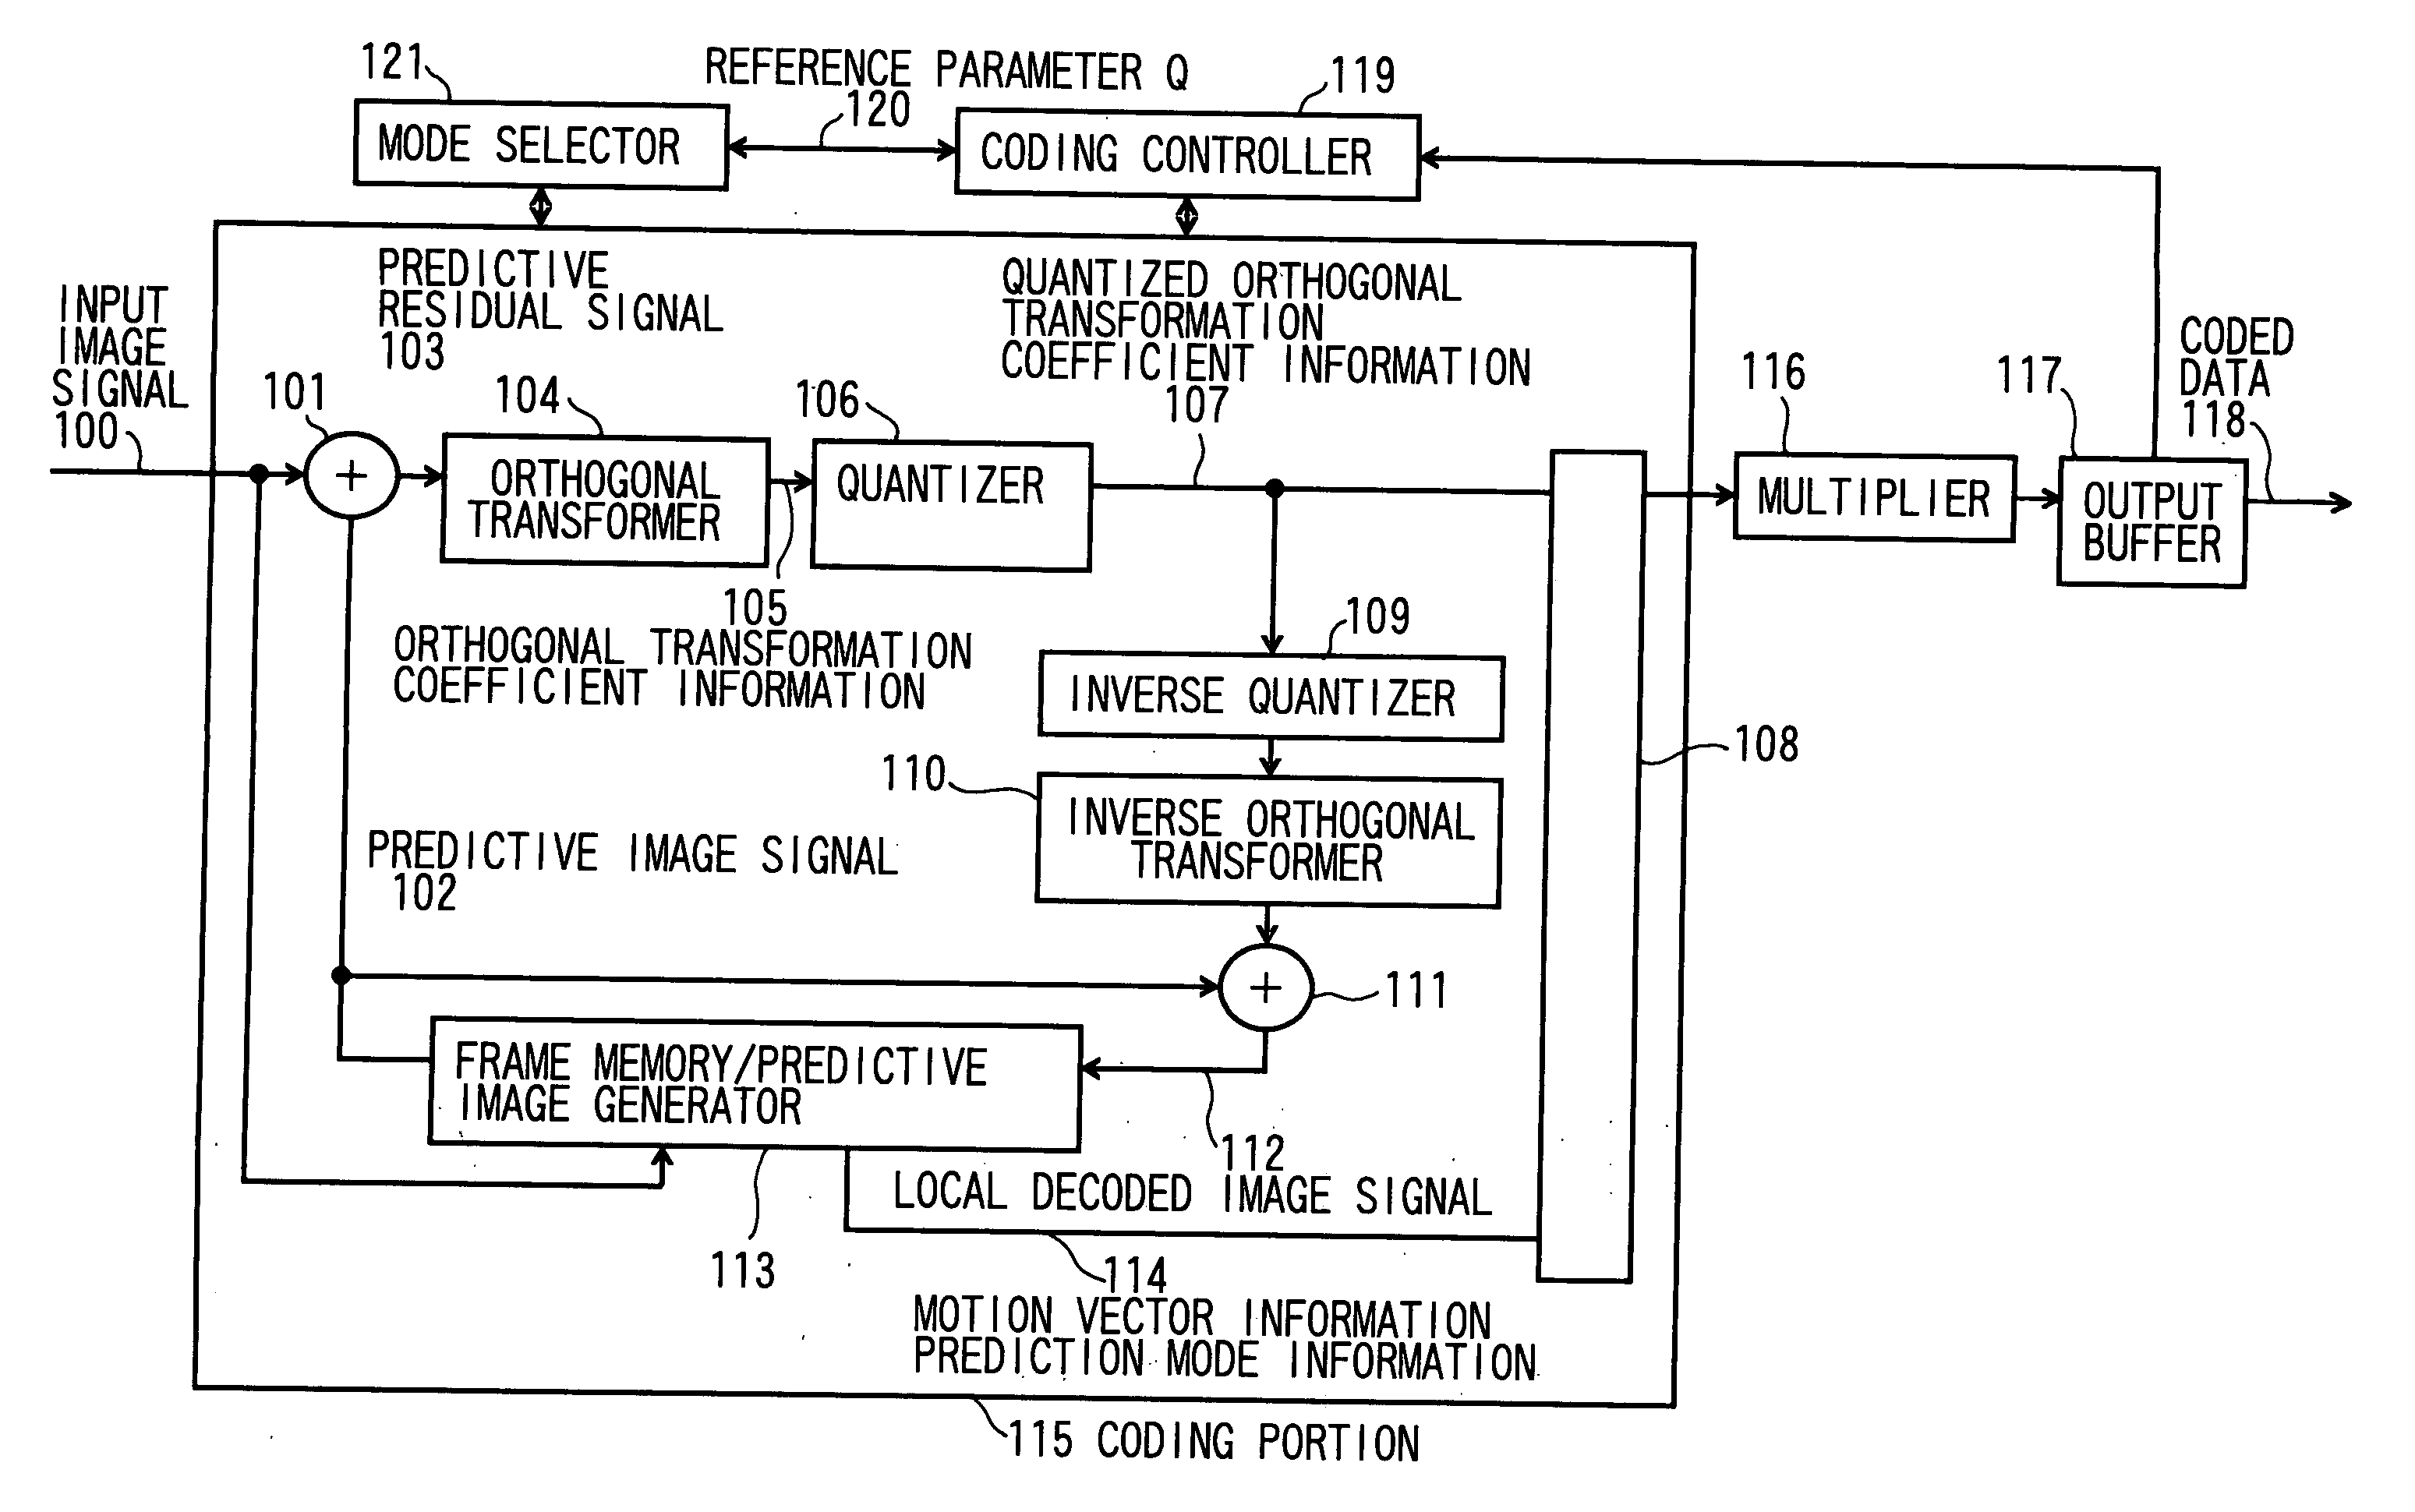 Image coding control method and device